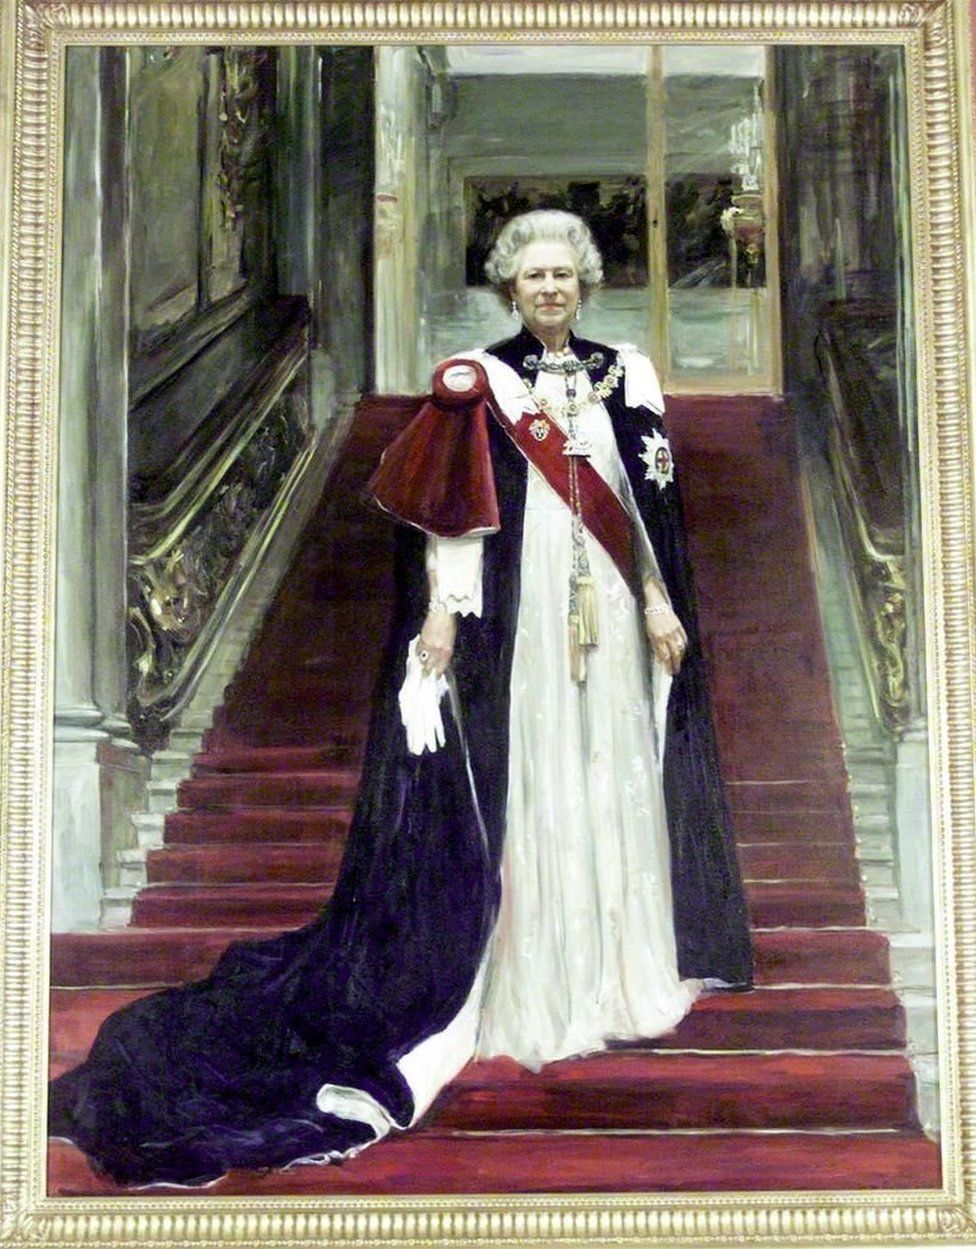 This portrait of Queen Elizabeth II by Sergei Pavlenko was unveiled at Drapers' Hall in 2000